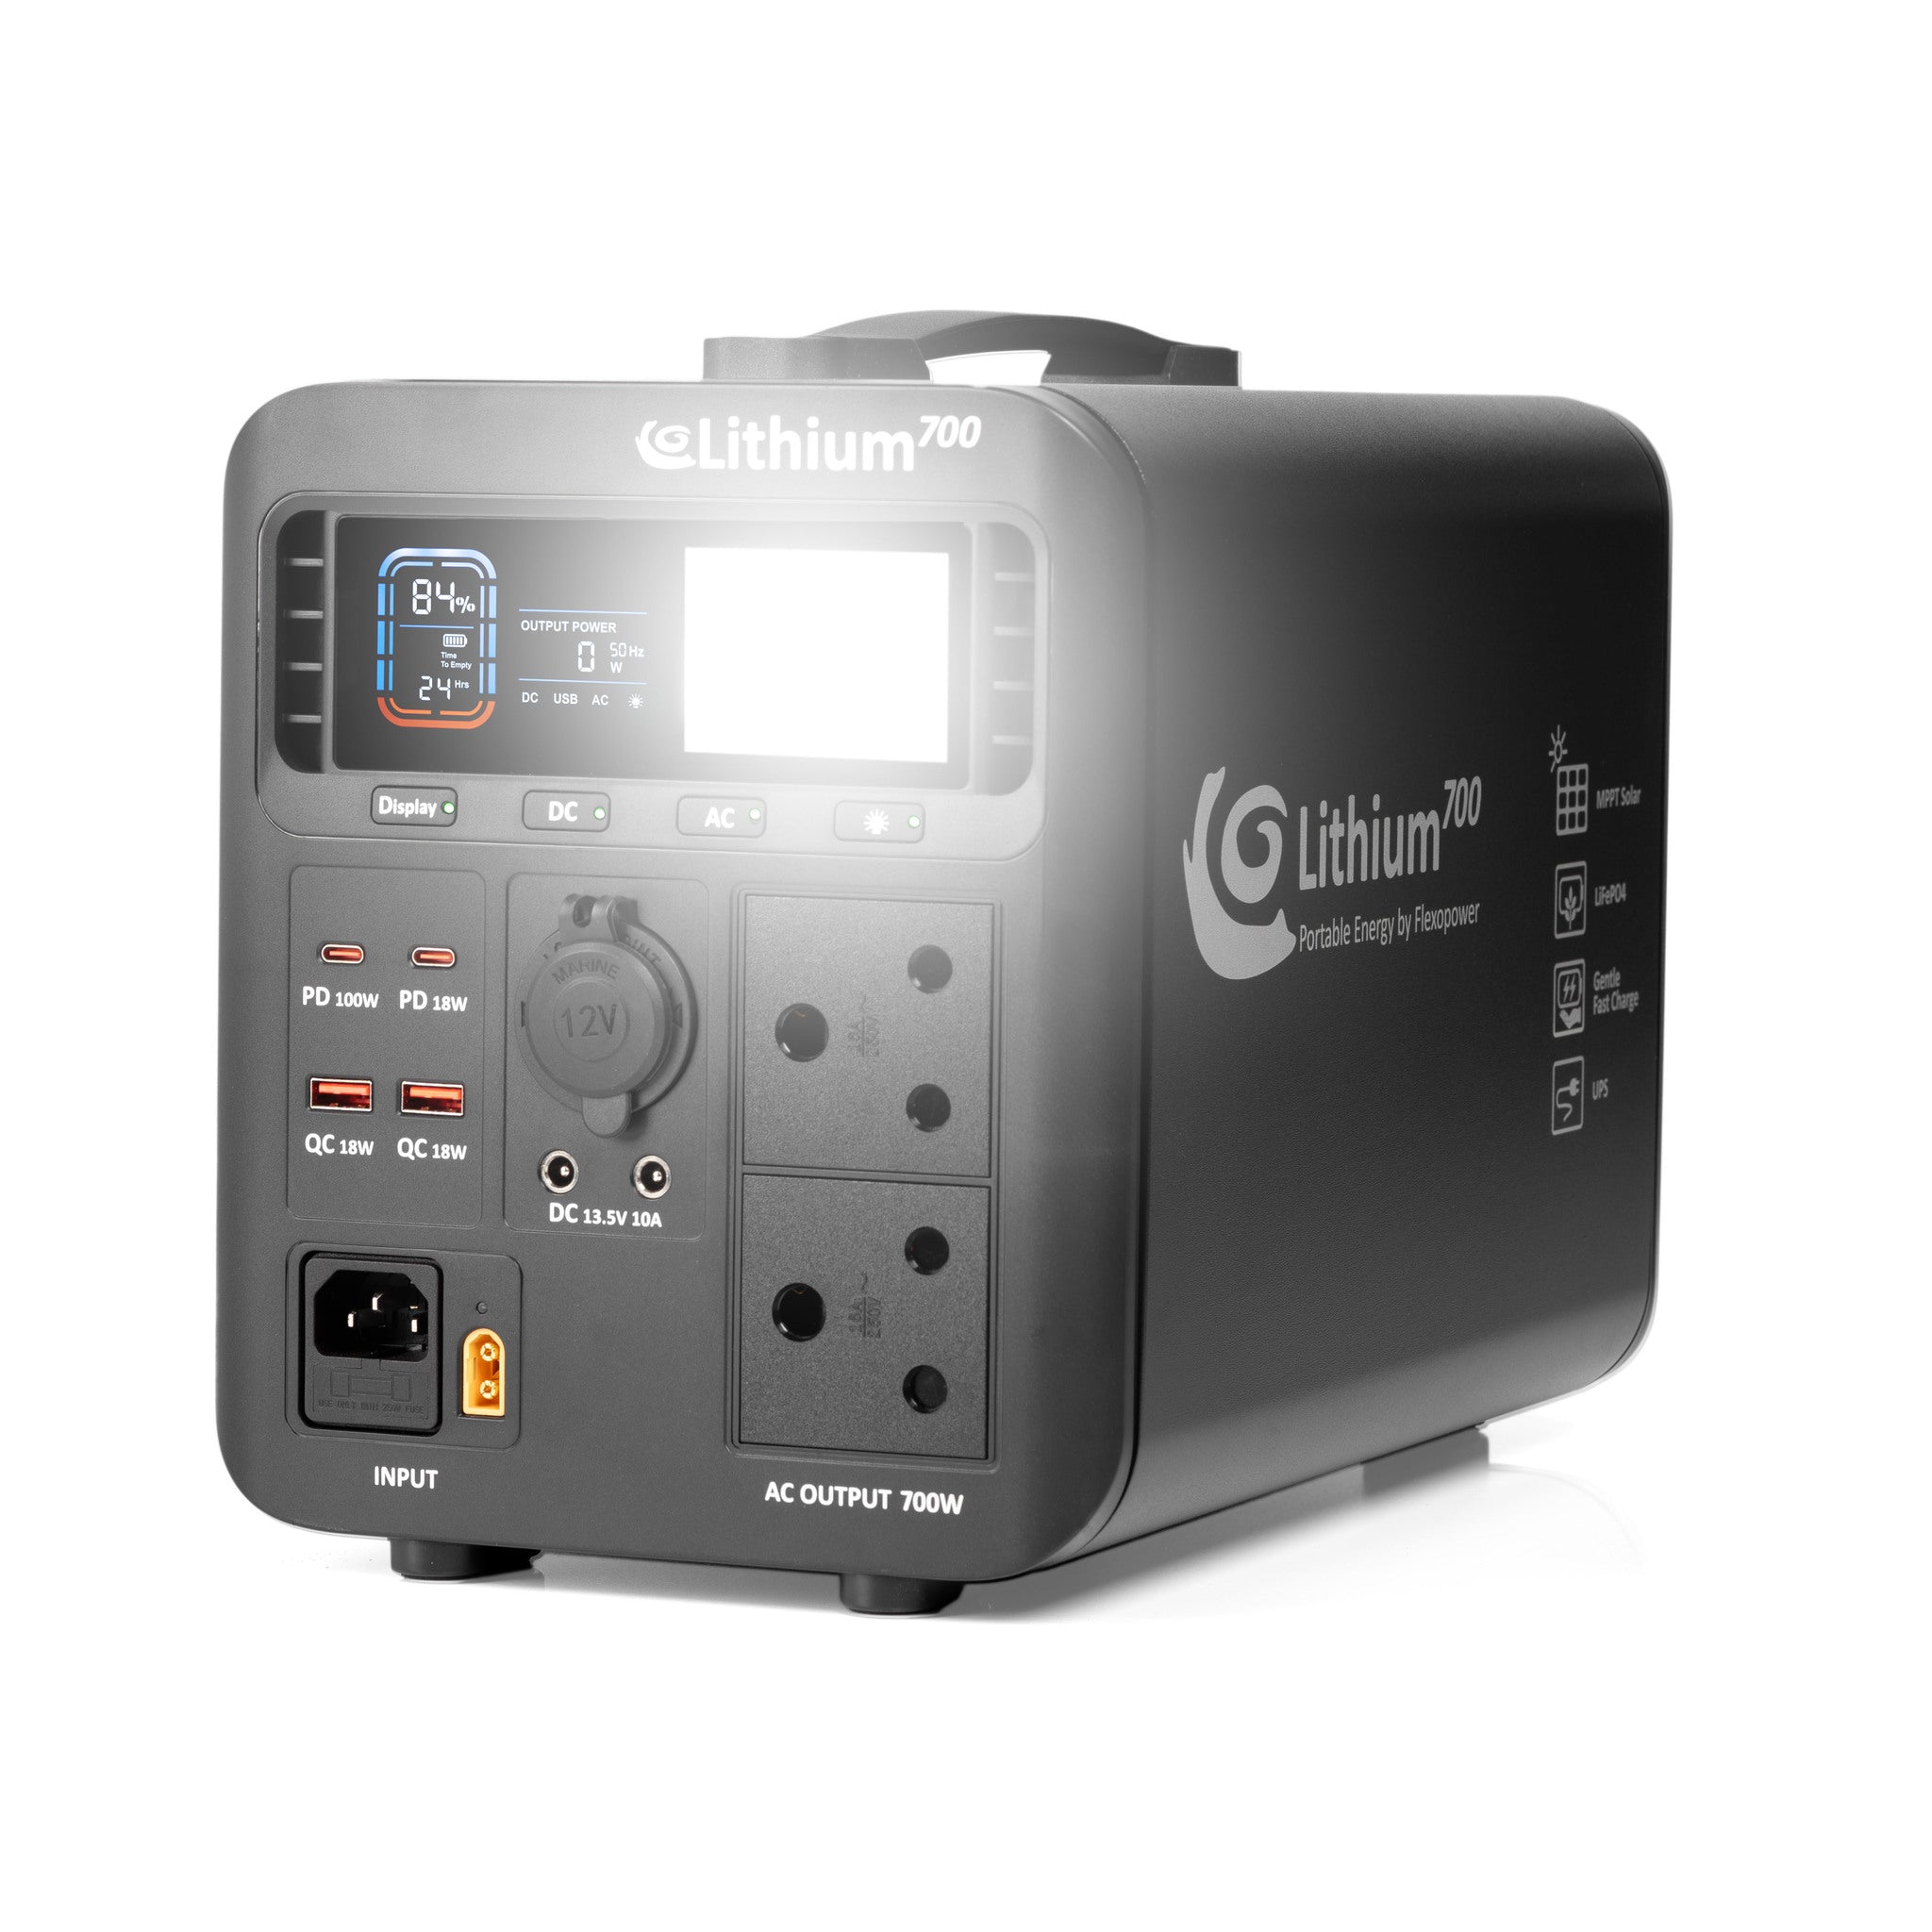 LITHIUM700 PORTABLE POWER STATION BY FLEXOPOWER